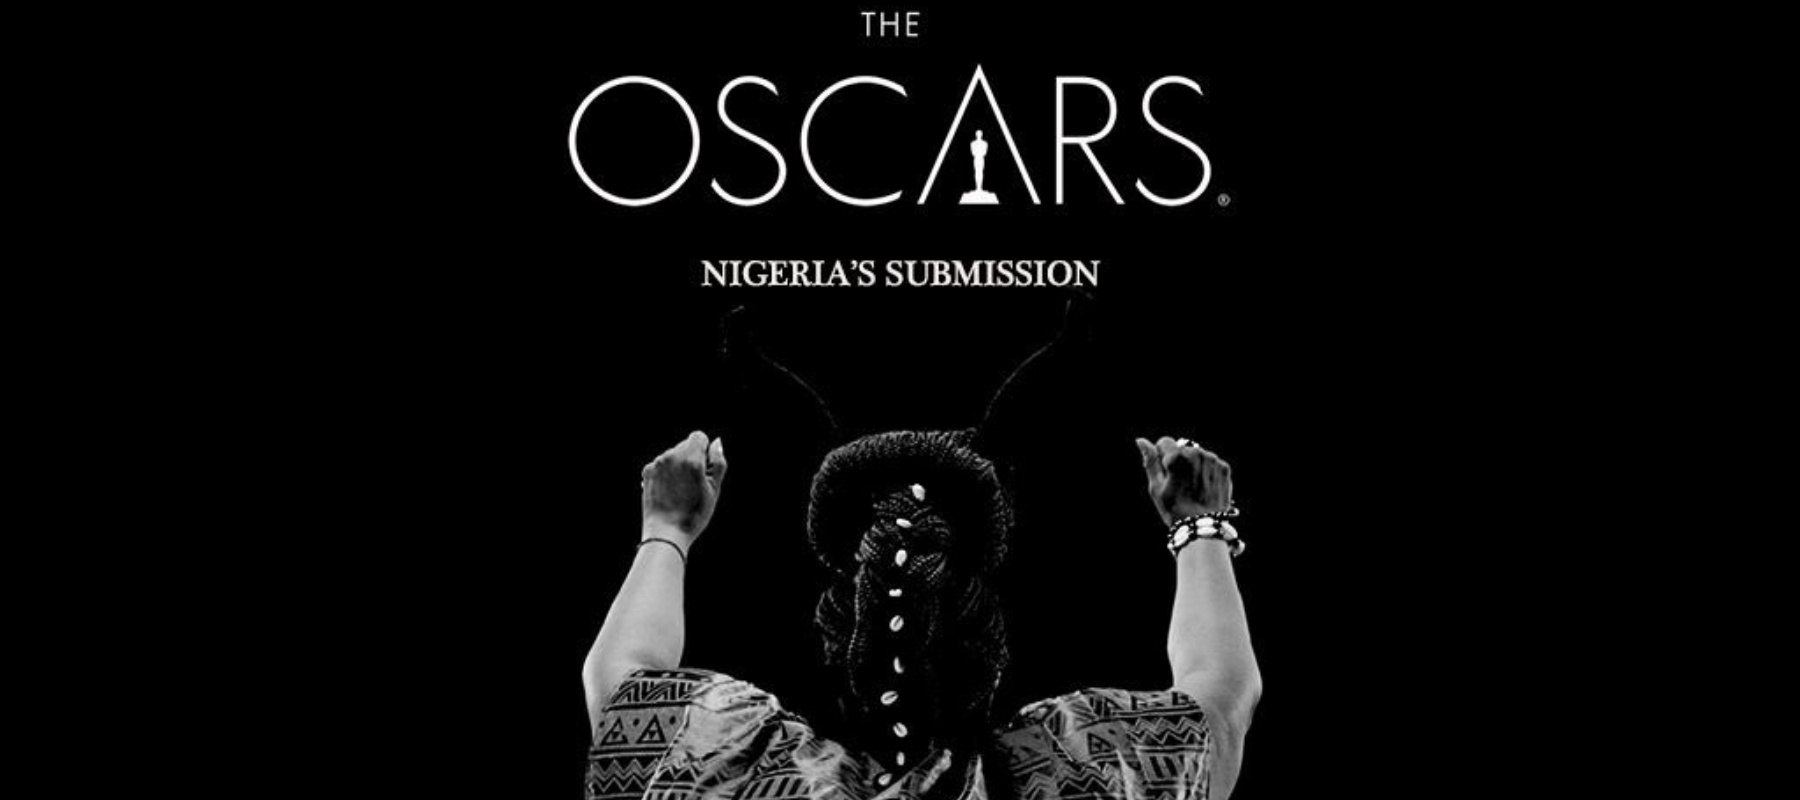 C.J. Obasi’s “Mami Wata” is Nigeria’s Submission for 96th Oscars Awards